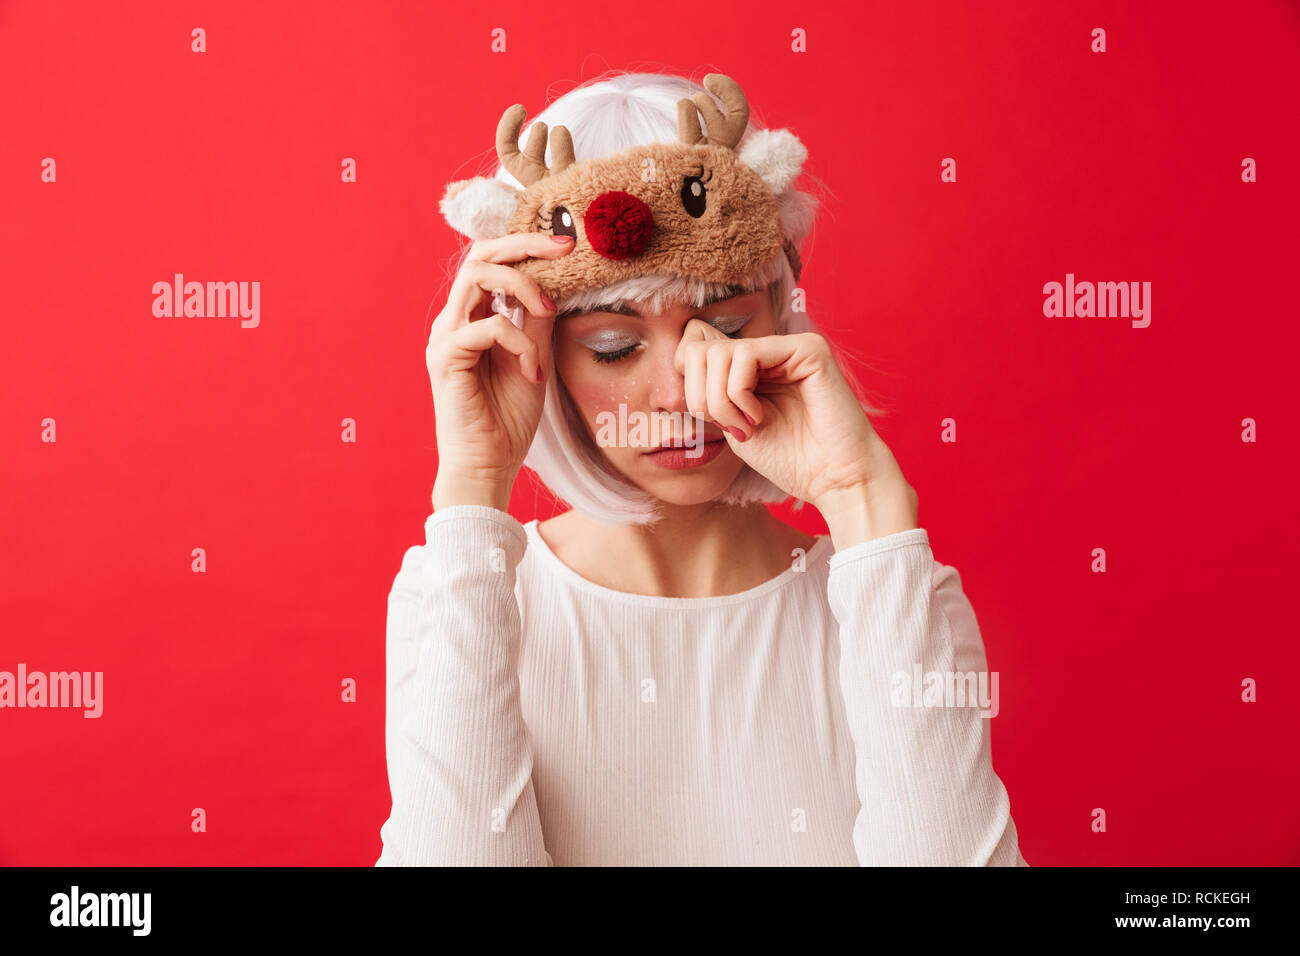 Image of a tired young woman dressed in carnival christmas costume posing isolated over red wall background. Stock Photo